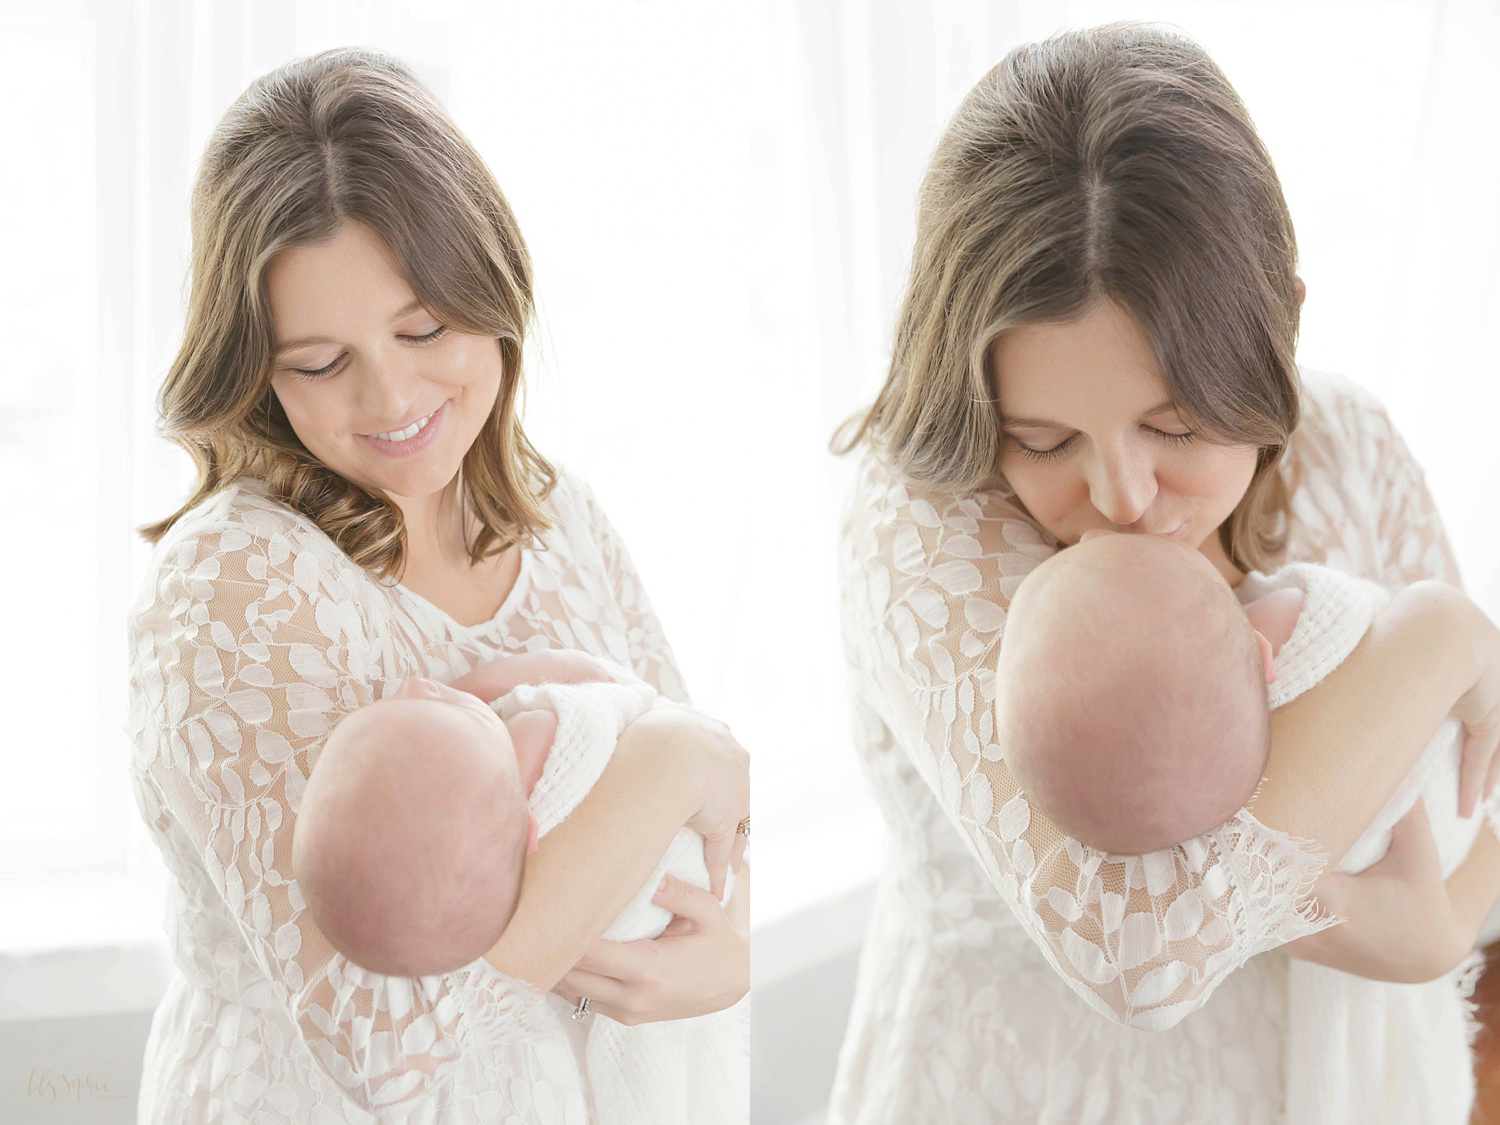  Side by side images of a mother holding her newborn son. In the first image she is smiling down at him, in the second image she is kissing forehead.&nbsp; 